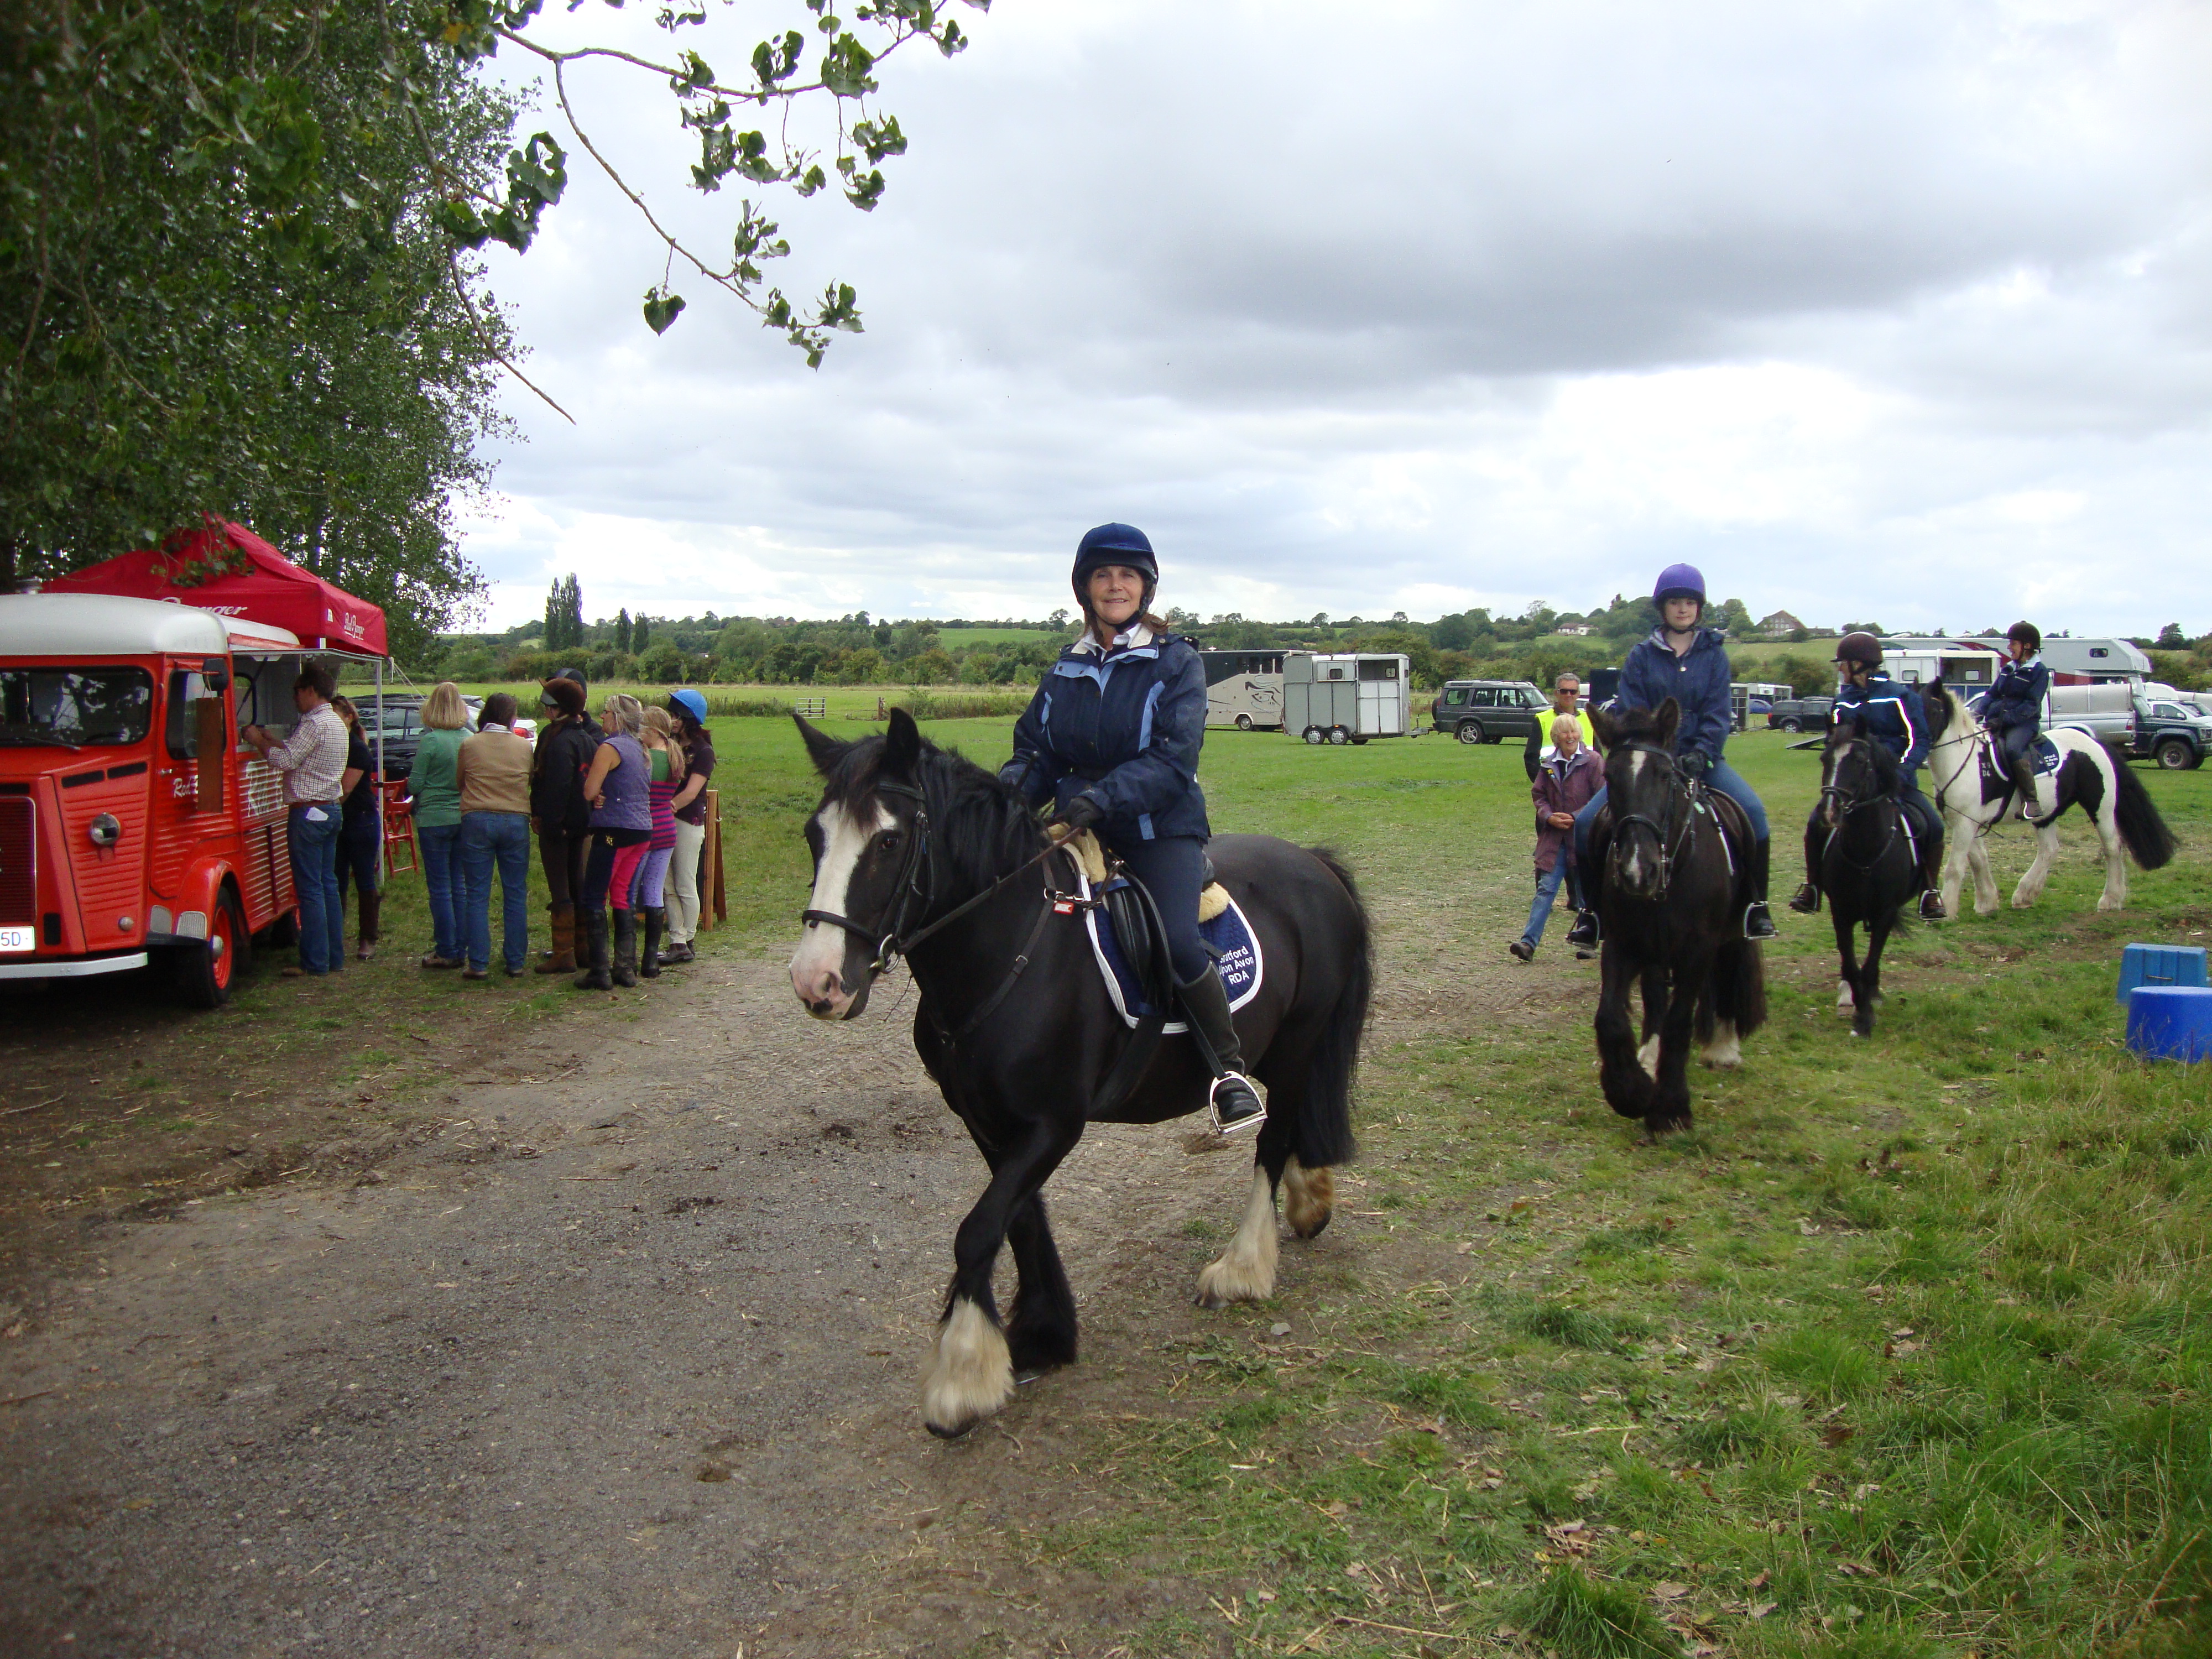 Thumbnail image for “Calling all horseriders” Kineton Fun Ride coming up